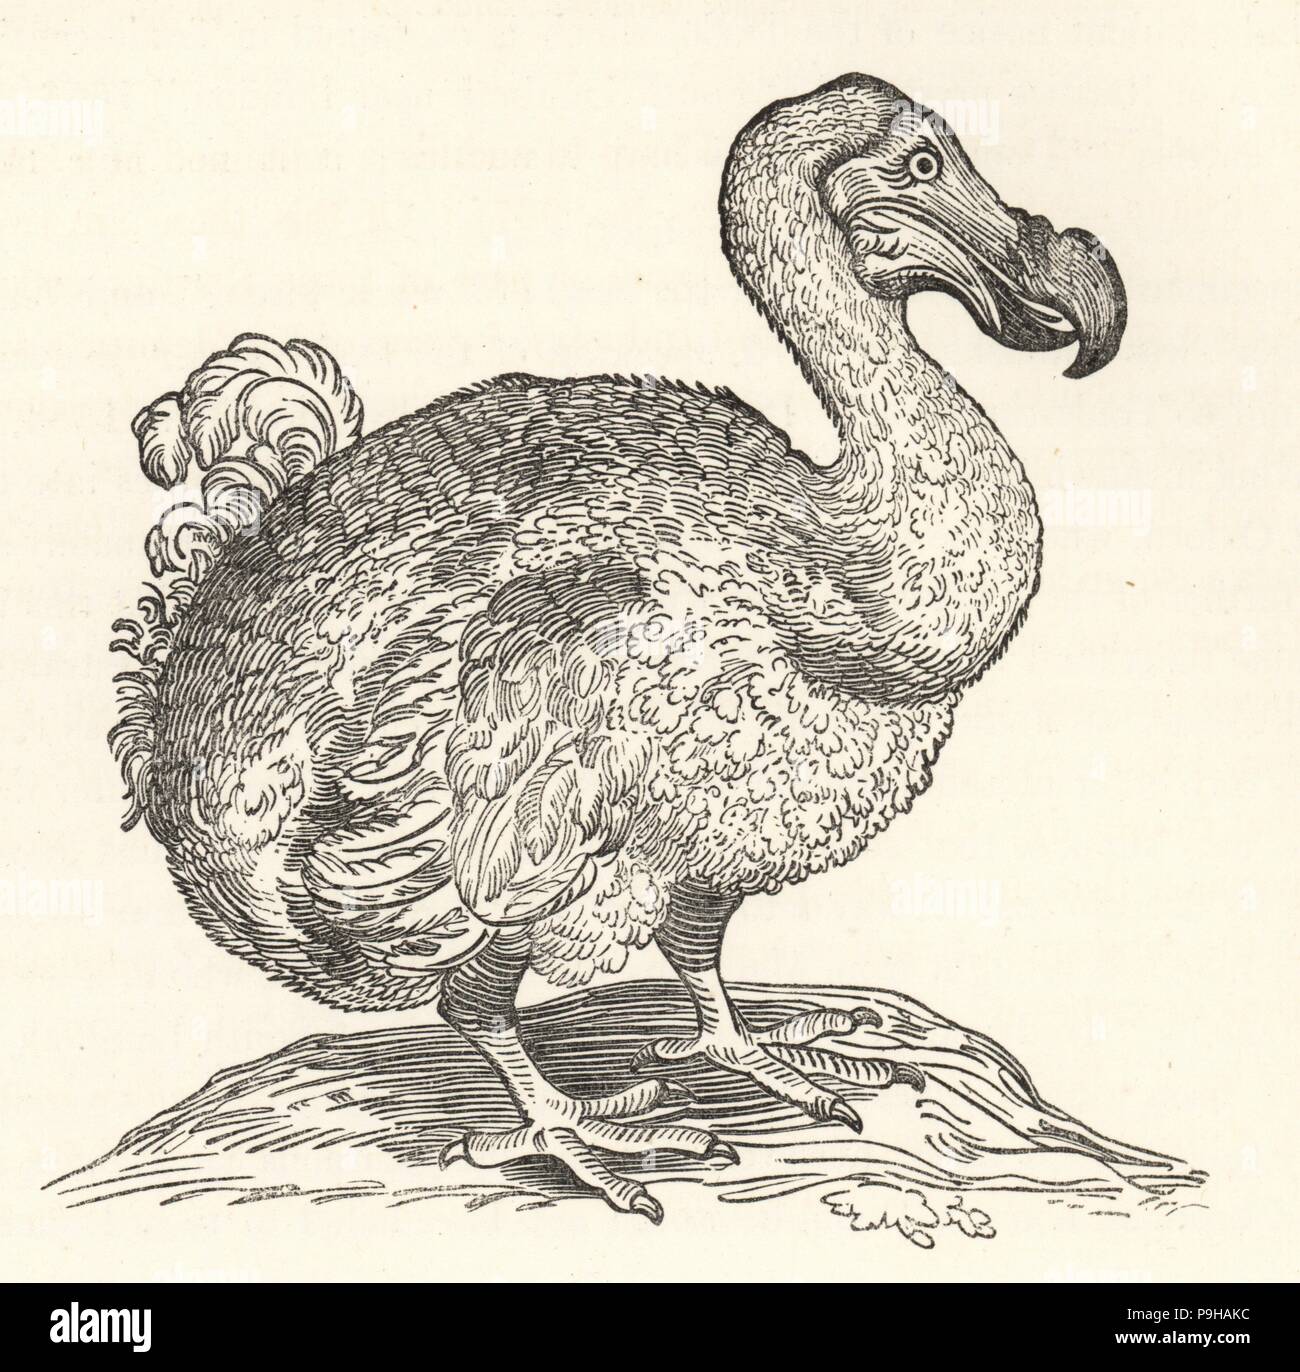 Willem Piso's illustration of the dodo, from Gulielmi Pisonis Medici Amstelaedamensis, 1658. Wood engraving from Hugh Edwin Strickland and Alexander Gordon Melville's The Dodo and its Kindred, London, Reeve, Benham and Reeve, 1848. Stock Photo